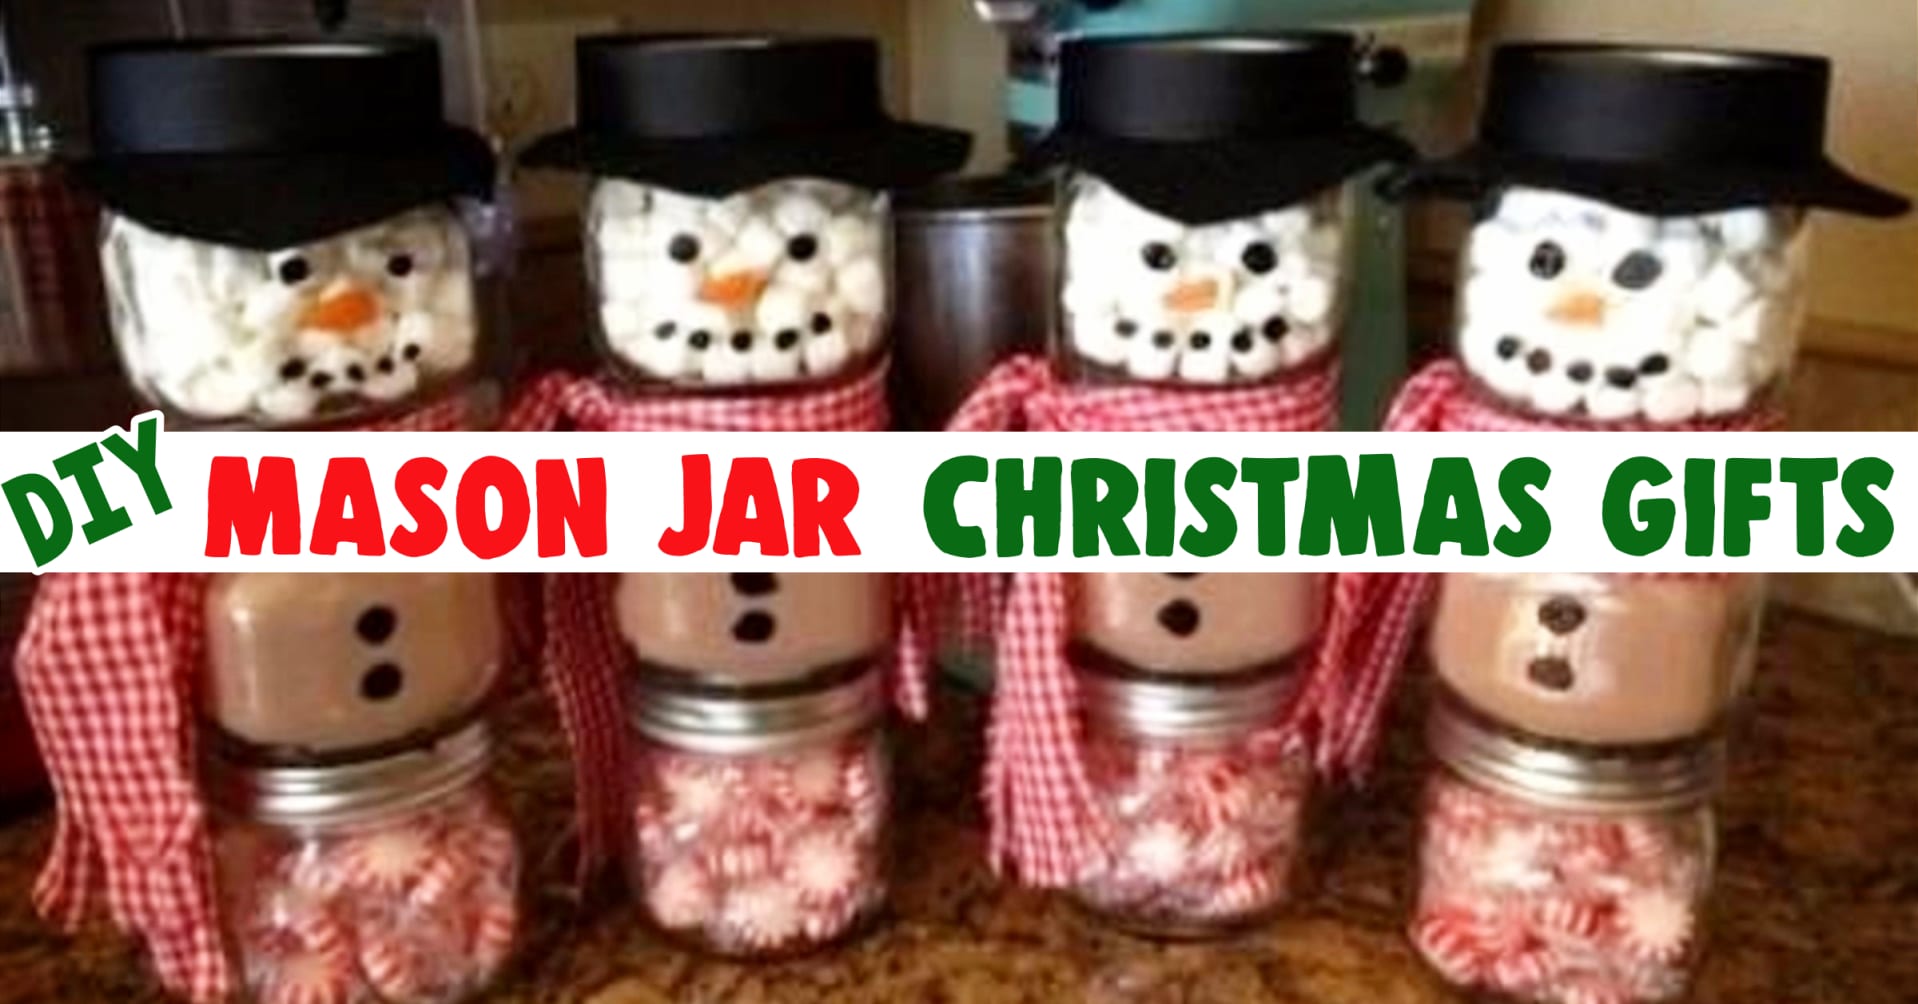 Mason Jar Christmas Gifts and Crafts - Easy Mason Jar Christmas Gift Ideas for Homemade Holiday Gifts for Neighbors, teachers, friends, co-workers and family. Easy DIY Christmas mason jars and Christmas mason jar decorating ideas - how to decorate mason jars for Christmas gifts - DIY Mason Jar Gifts and Cute Mason Jar Ideas For Christmas Presents